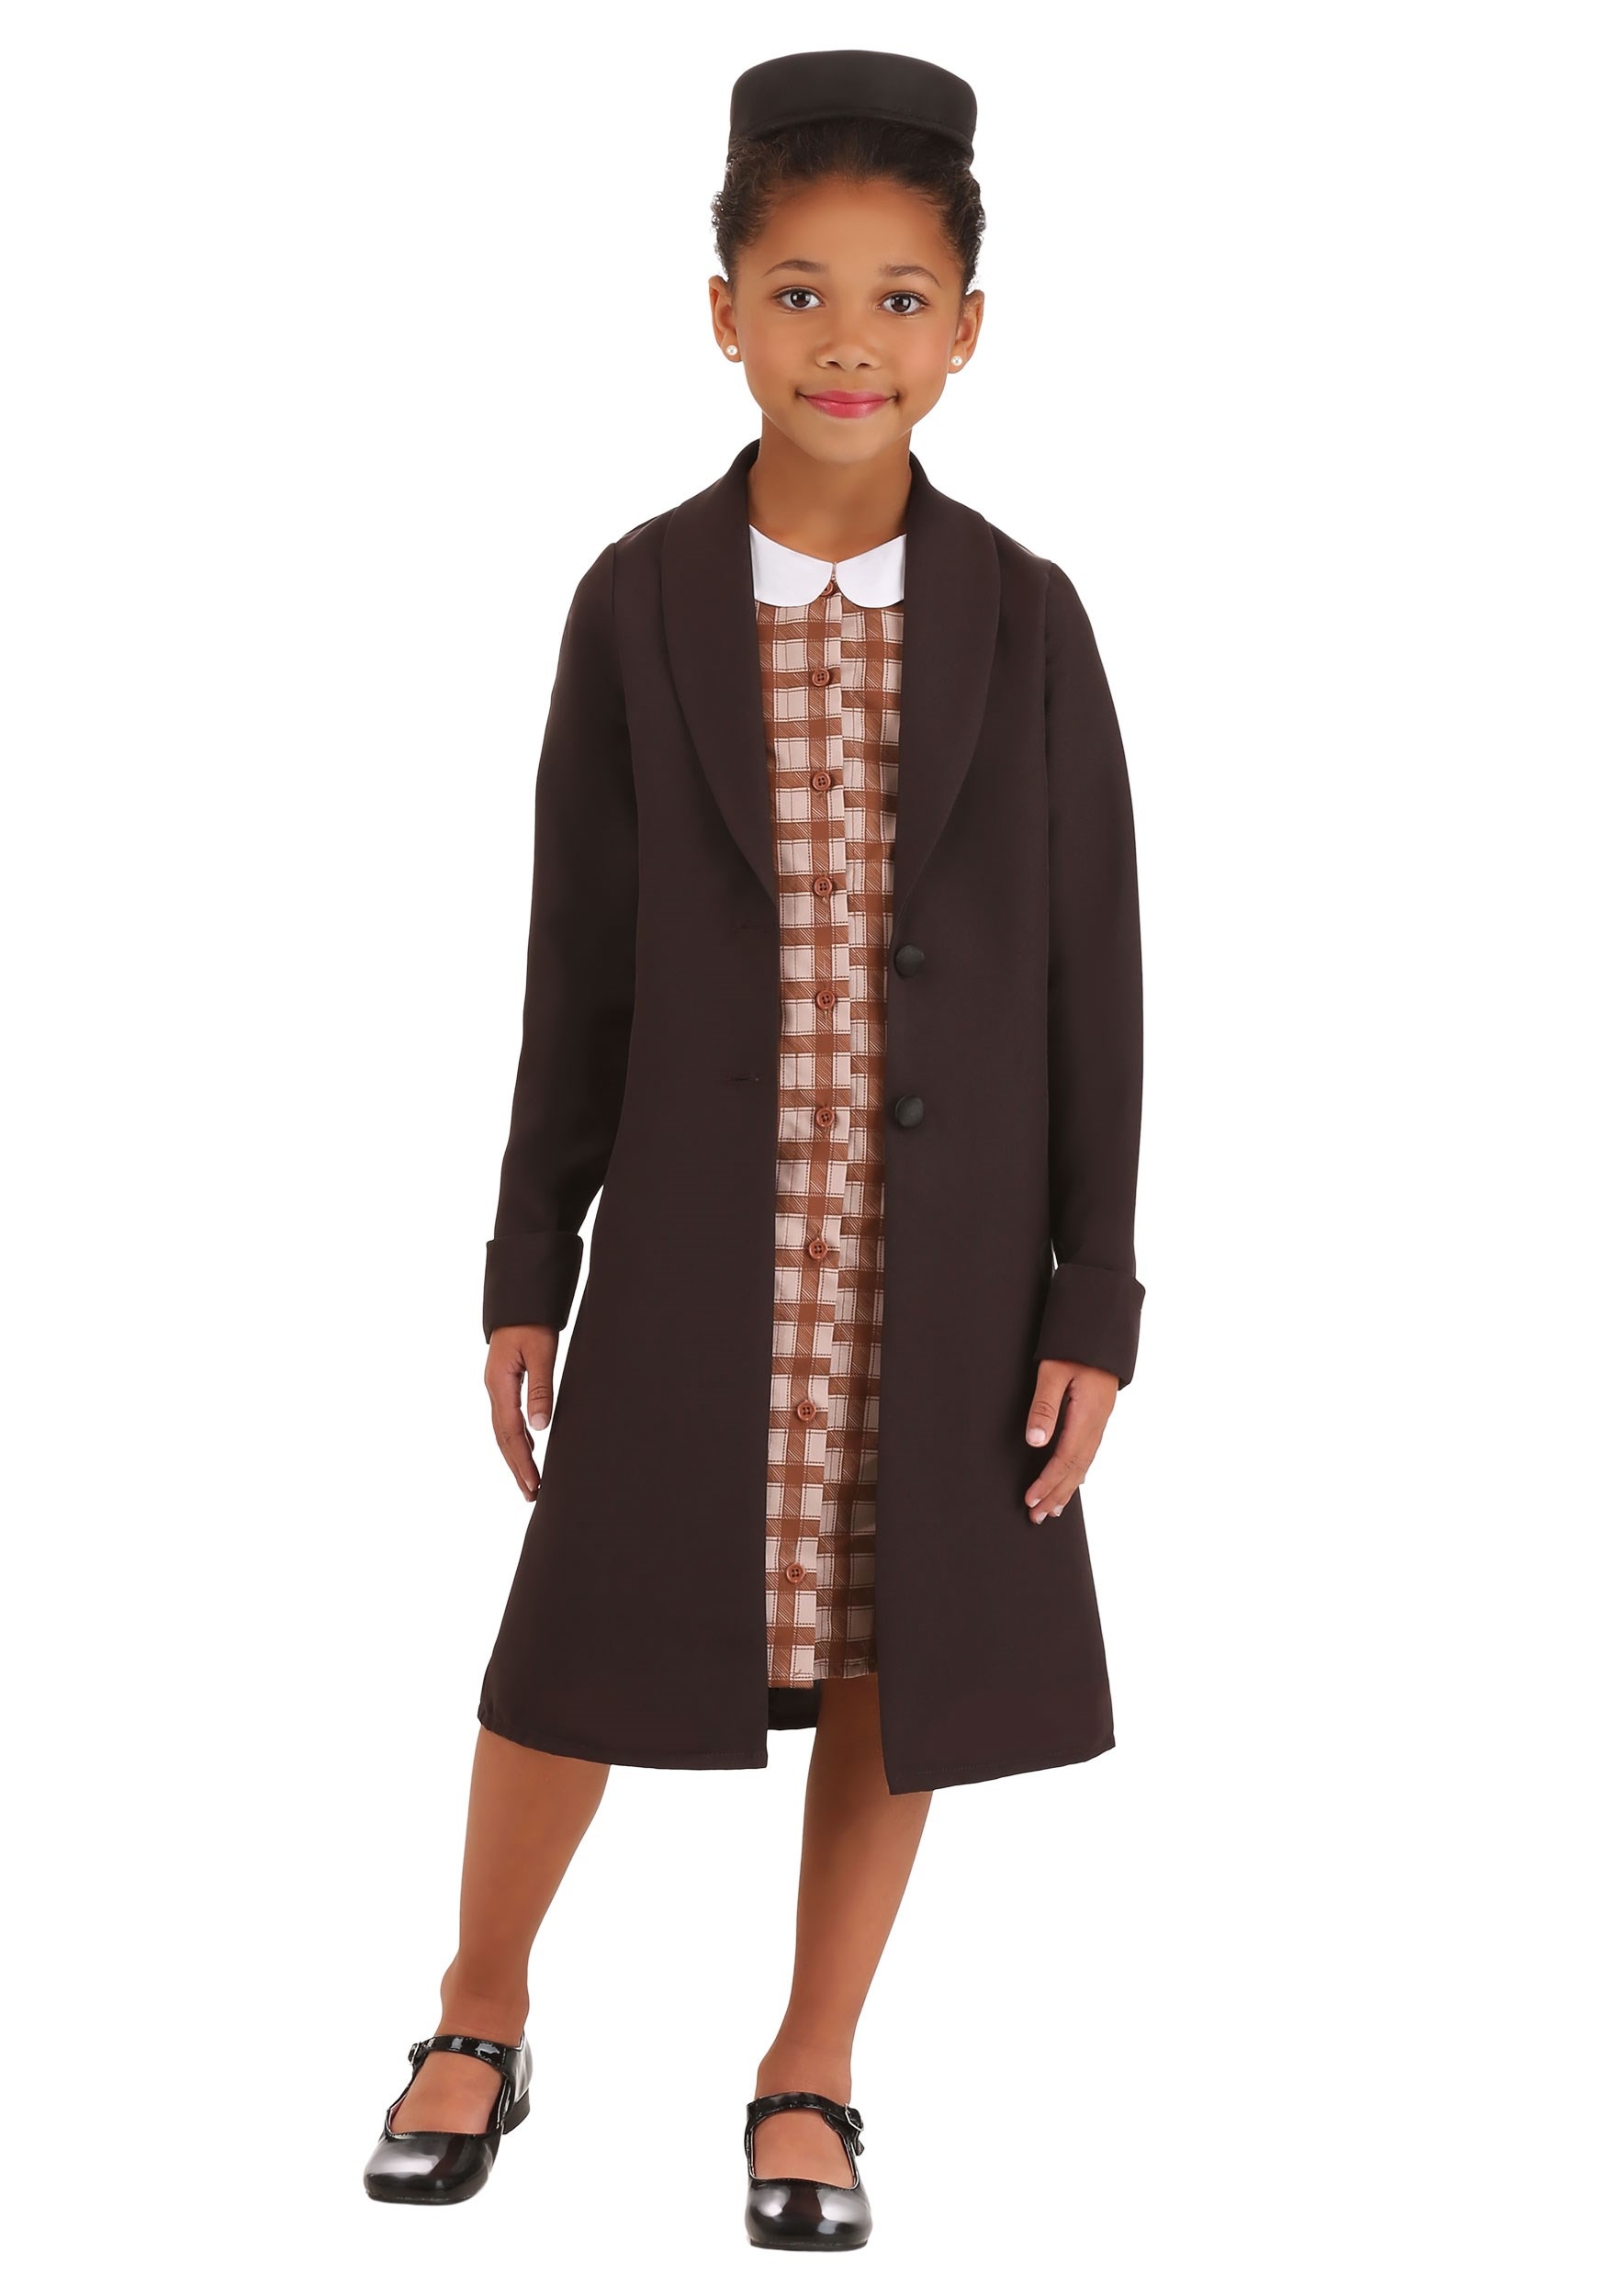 Rosa Parks Costume For Girls , Historical Costumes